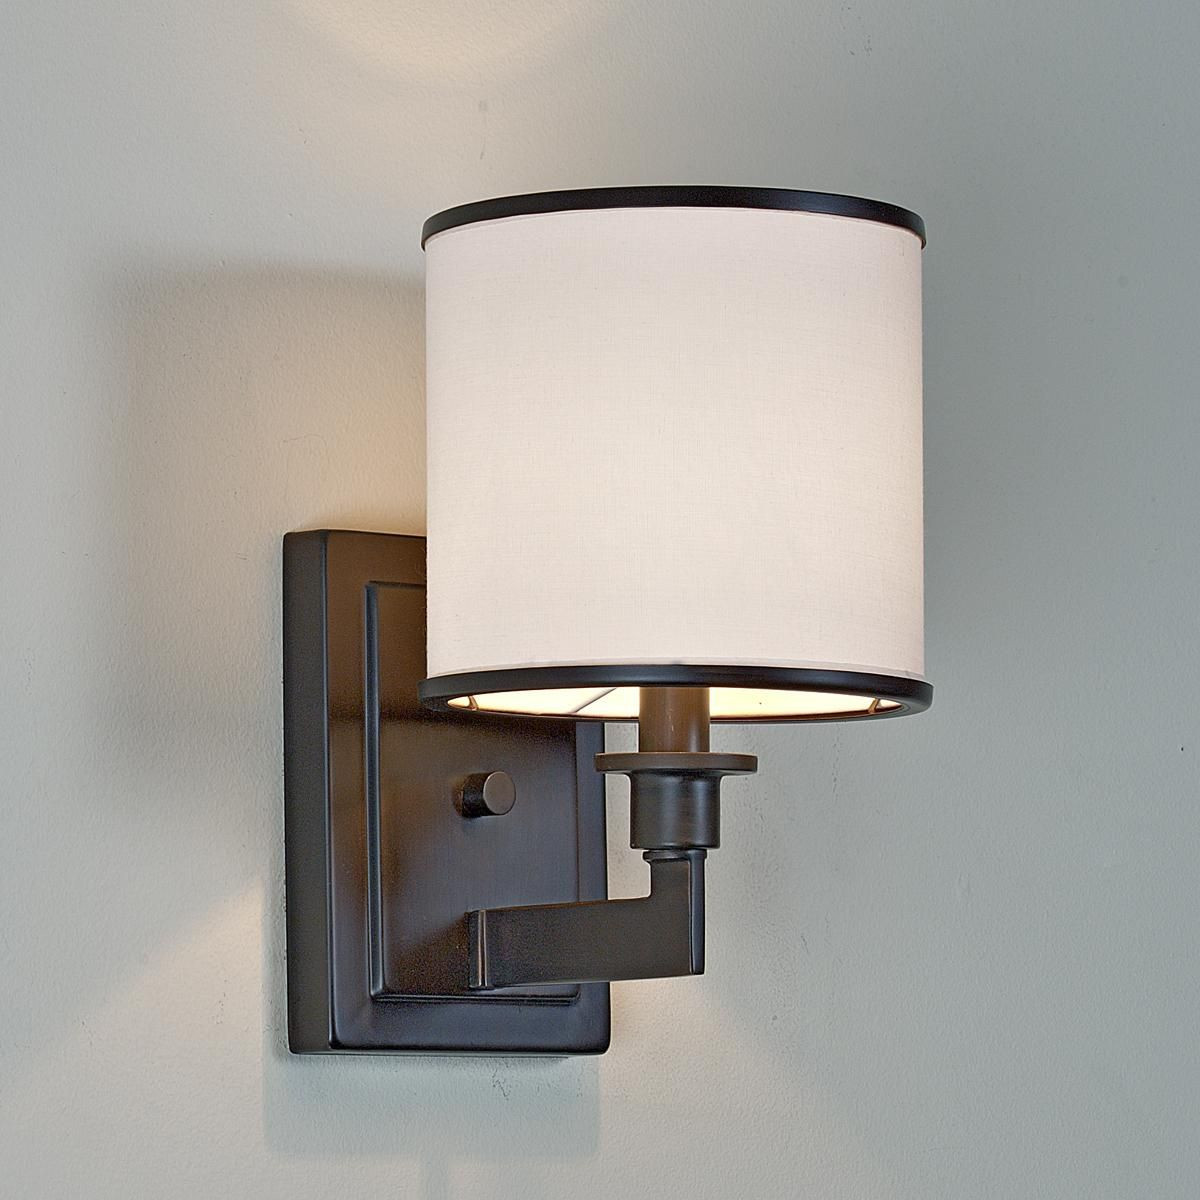 Wall Sconce For Bathroom
 Soft Contemporary Sconce 1 Light